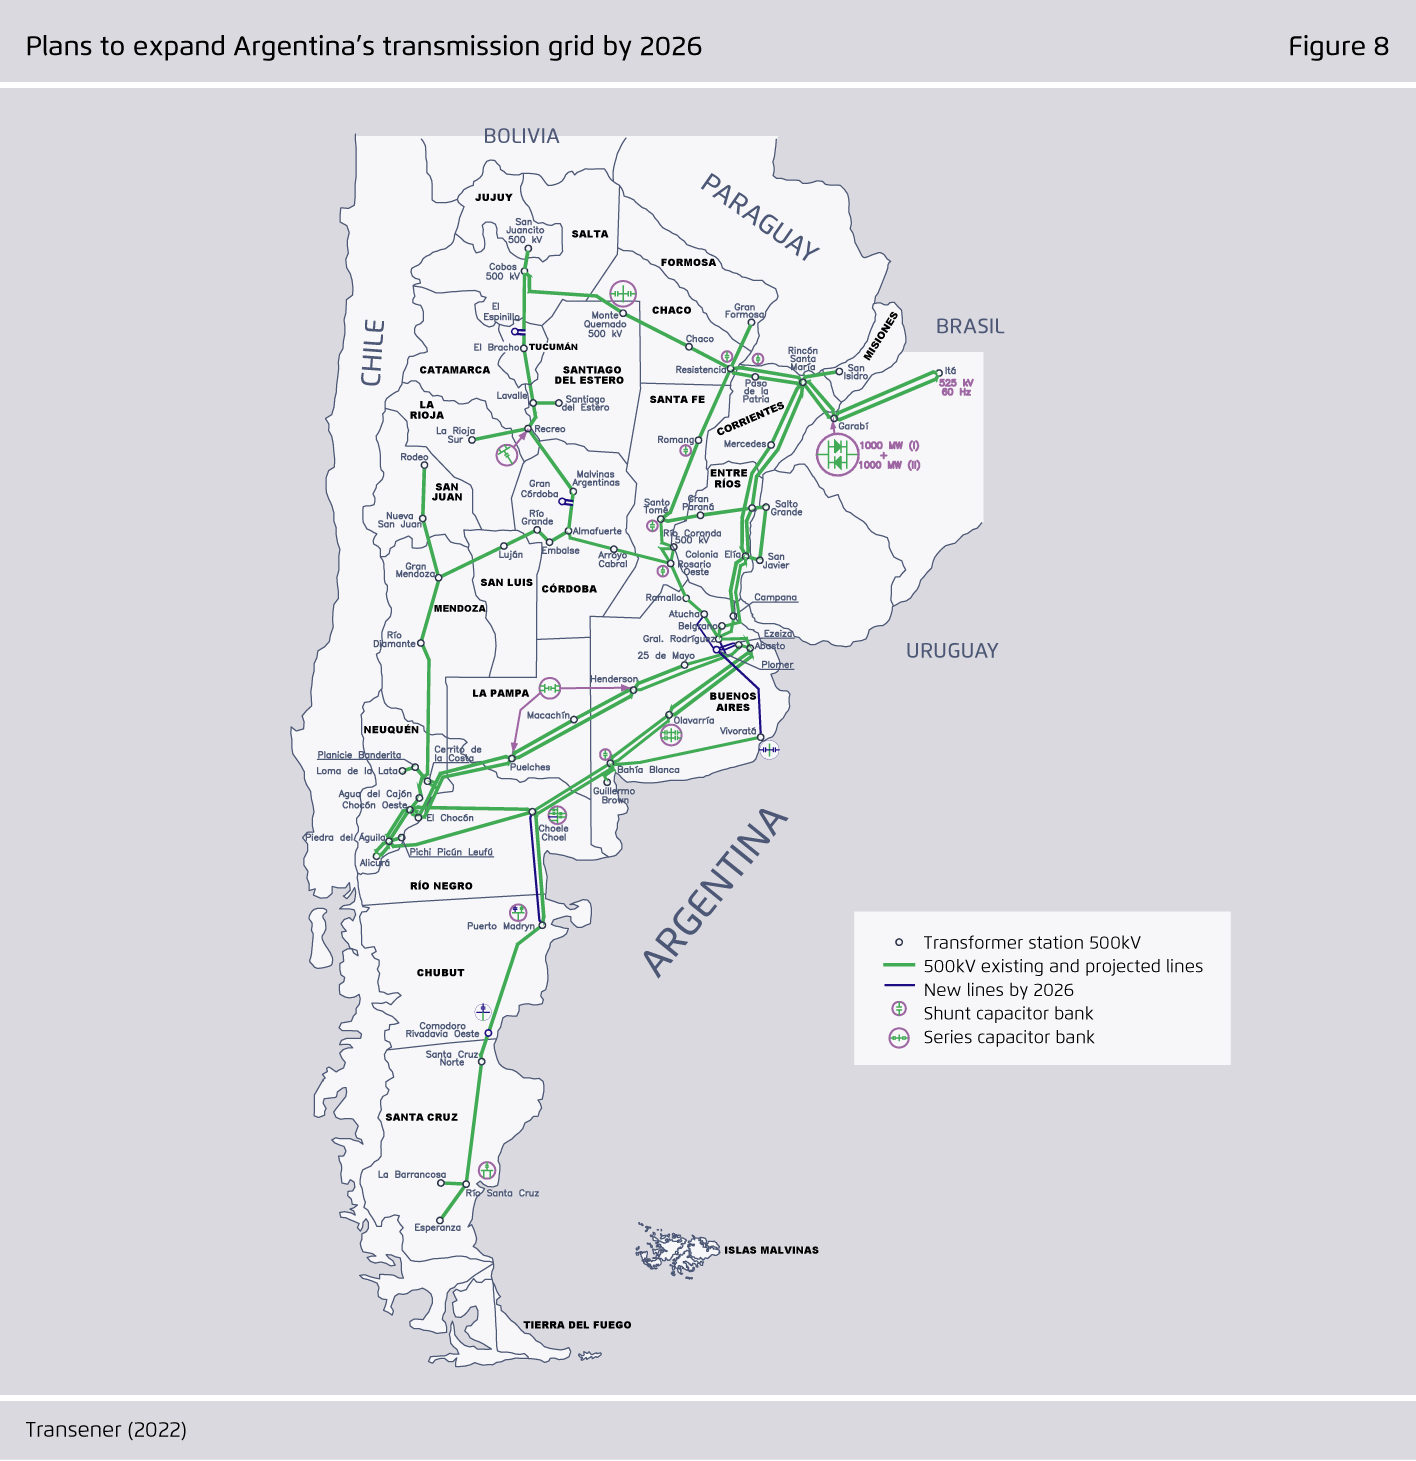 Preview for Plans to expand Argentina’s transmission grid by 2026